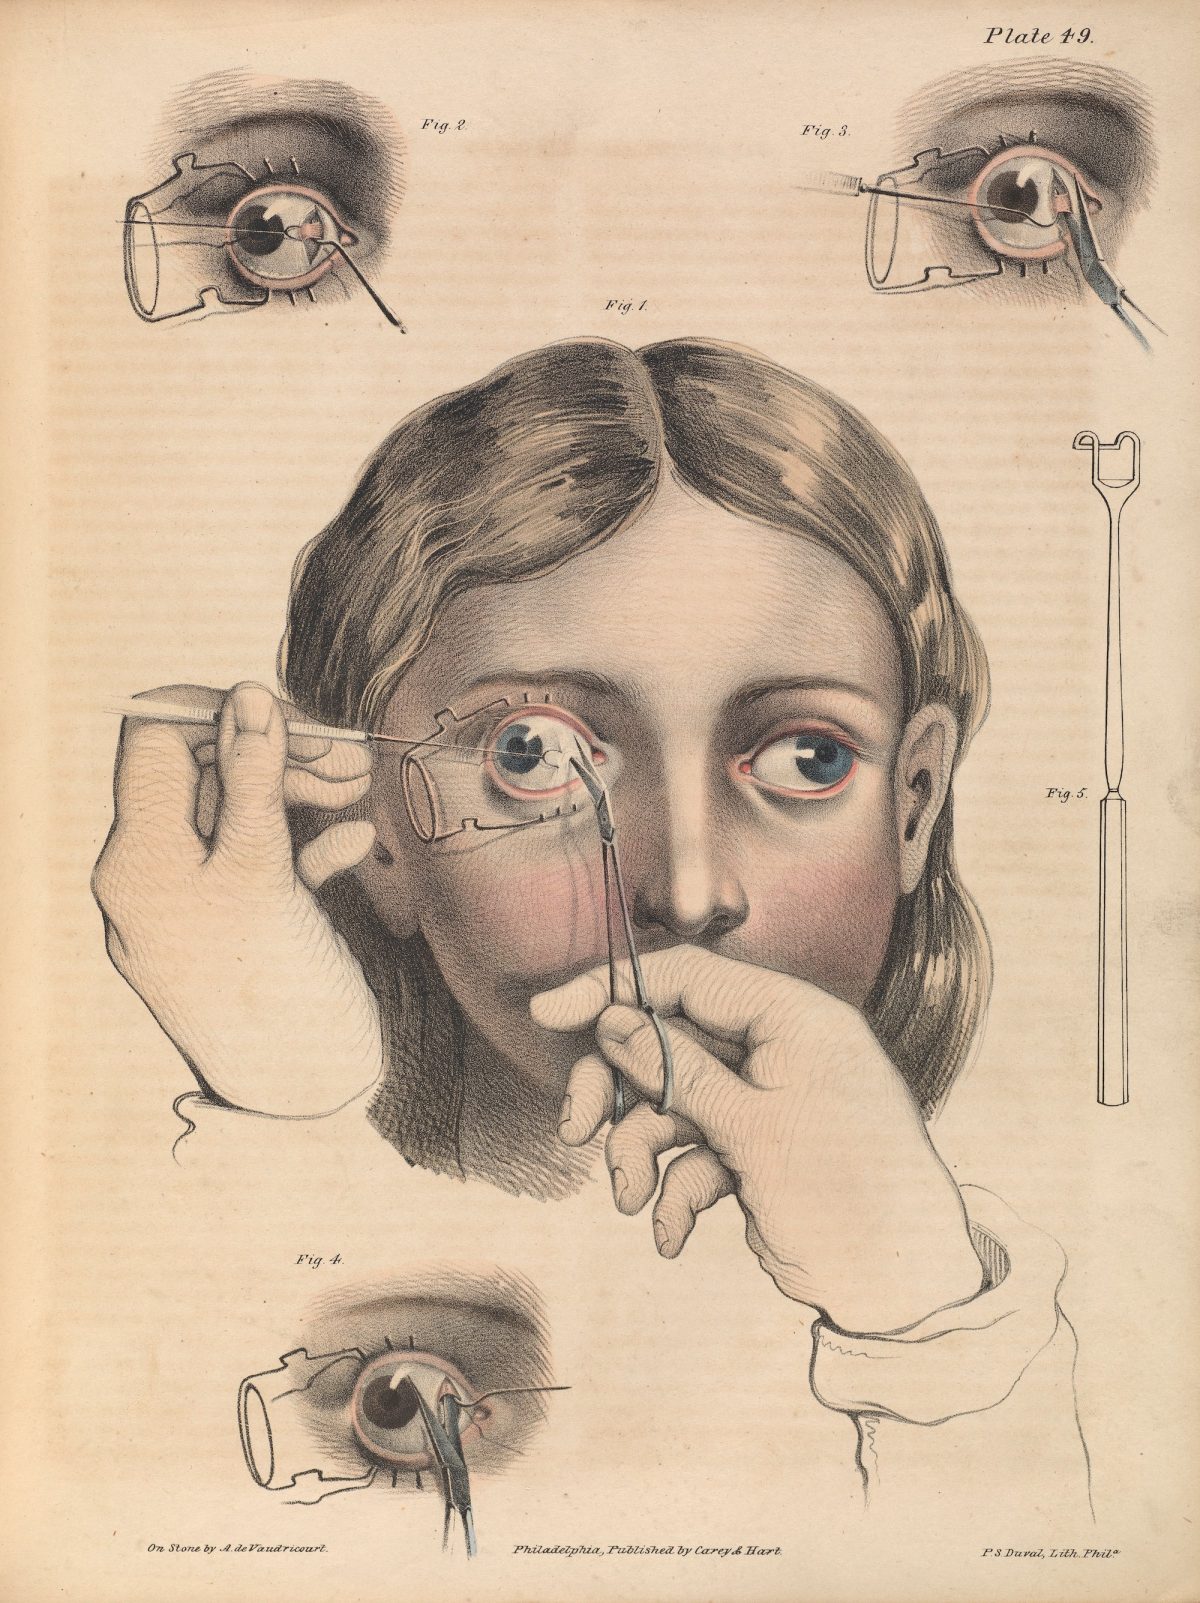 Plate XLIX. Surgery to correct strabismus, involving the division of the internal rectus of the right eye. Strabismus is the misalignment of the eyes.